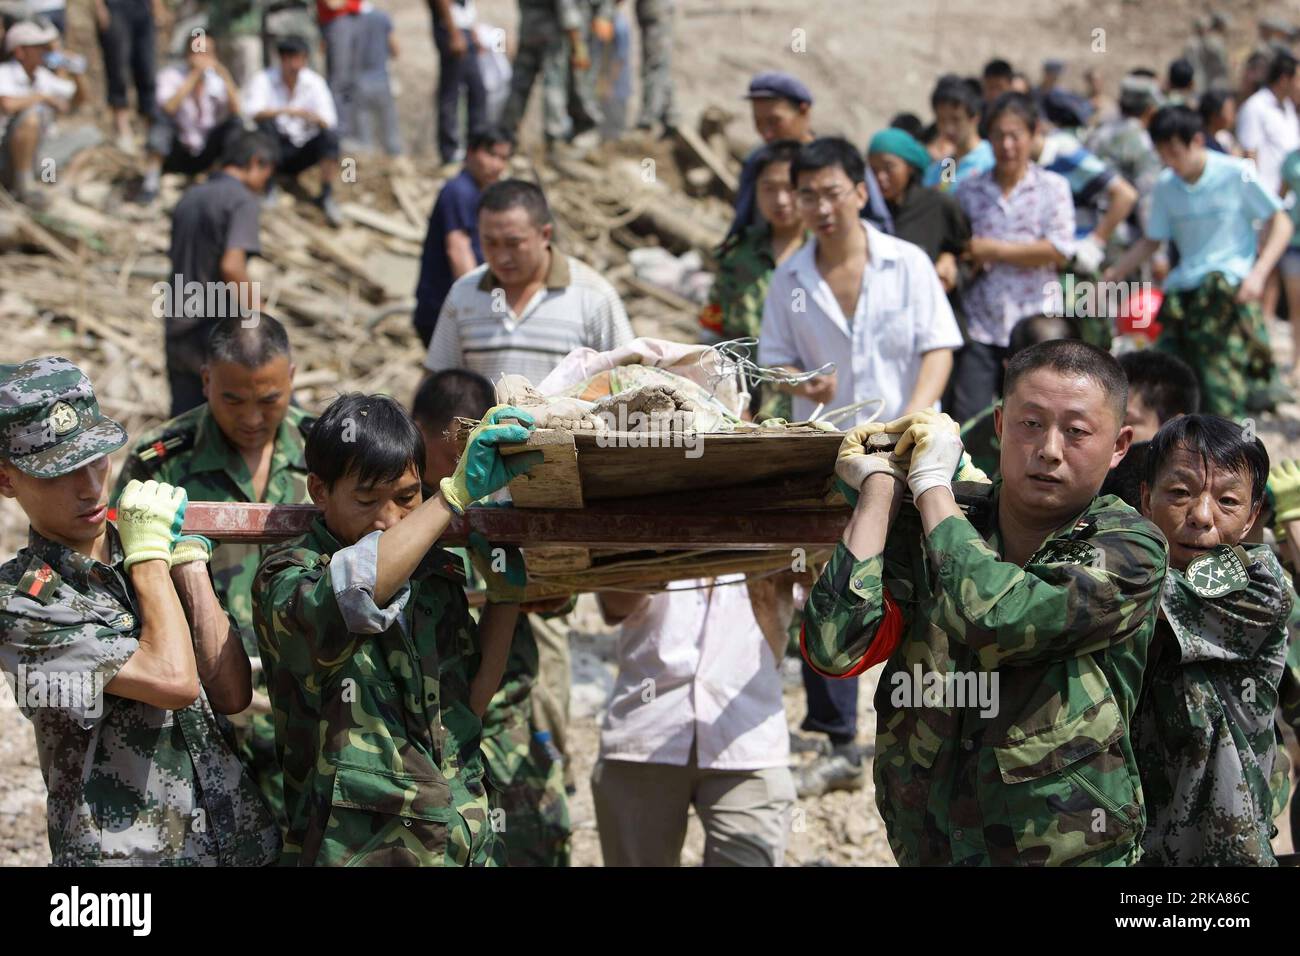 Bildnummer: 54284967  Datum: 09.08.2010  Copyright: imago/Xinhua ZHOUQU, Aug. 9, 2010 (Xinhua) -- Rescuers carry a victim s body in landslides-hit Zhouqu County, Gannan Tibetan Autonomous Prefecture in northwest China s Gansu Province, Aug. 9, 2010. The death toll from rain-triggered mudslides in Zhouqu County has risen to 137 as of 4:07 p.m. Monday, with 1,348 others still missing, said the provincial civil affairs department. Rescuers are racing against time in the search for survivors in the mudslide-flattened Zhouqu. (Xinhua/Xing Guangli) (cxy) CHINA-GANSU-ZHOUQU-LANDSLIDE-RESCUE (CN) PUBL Stock Photo